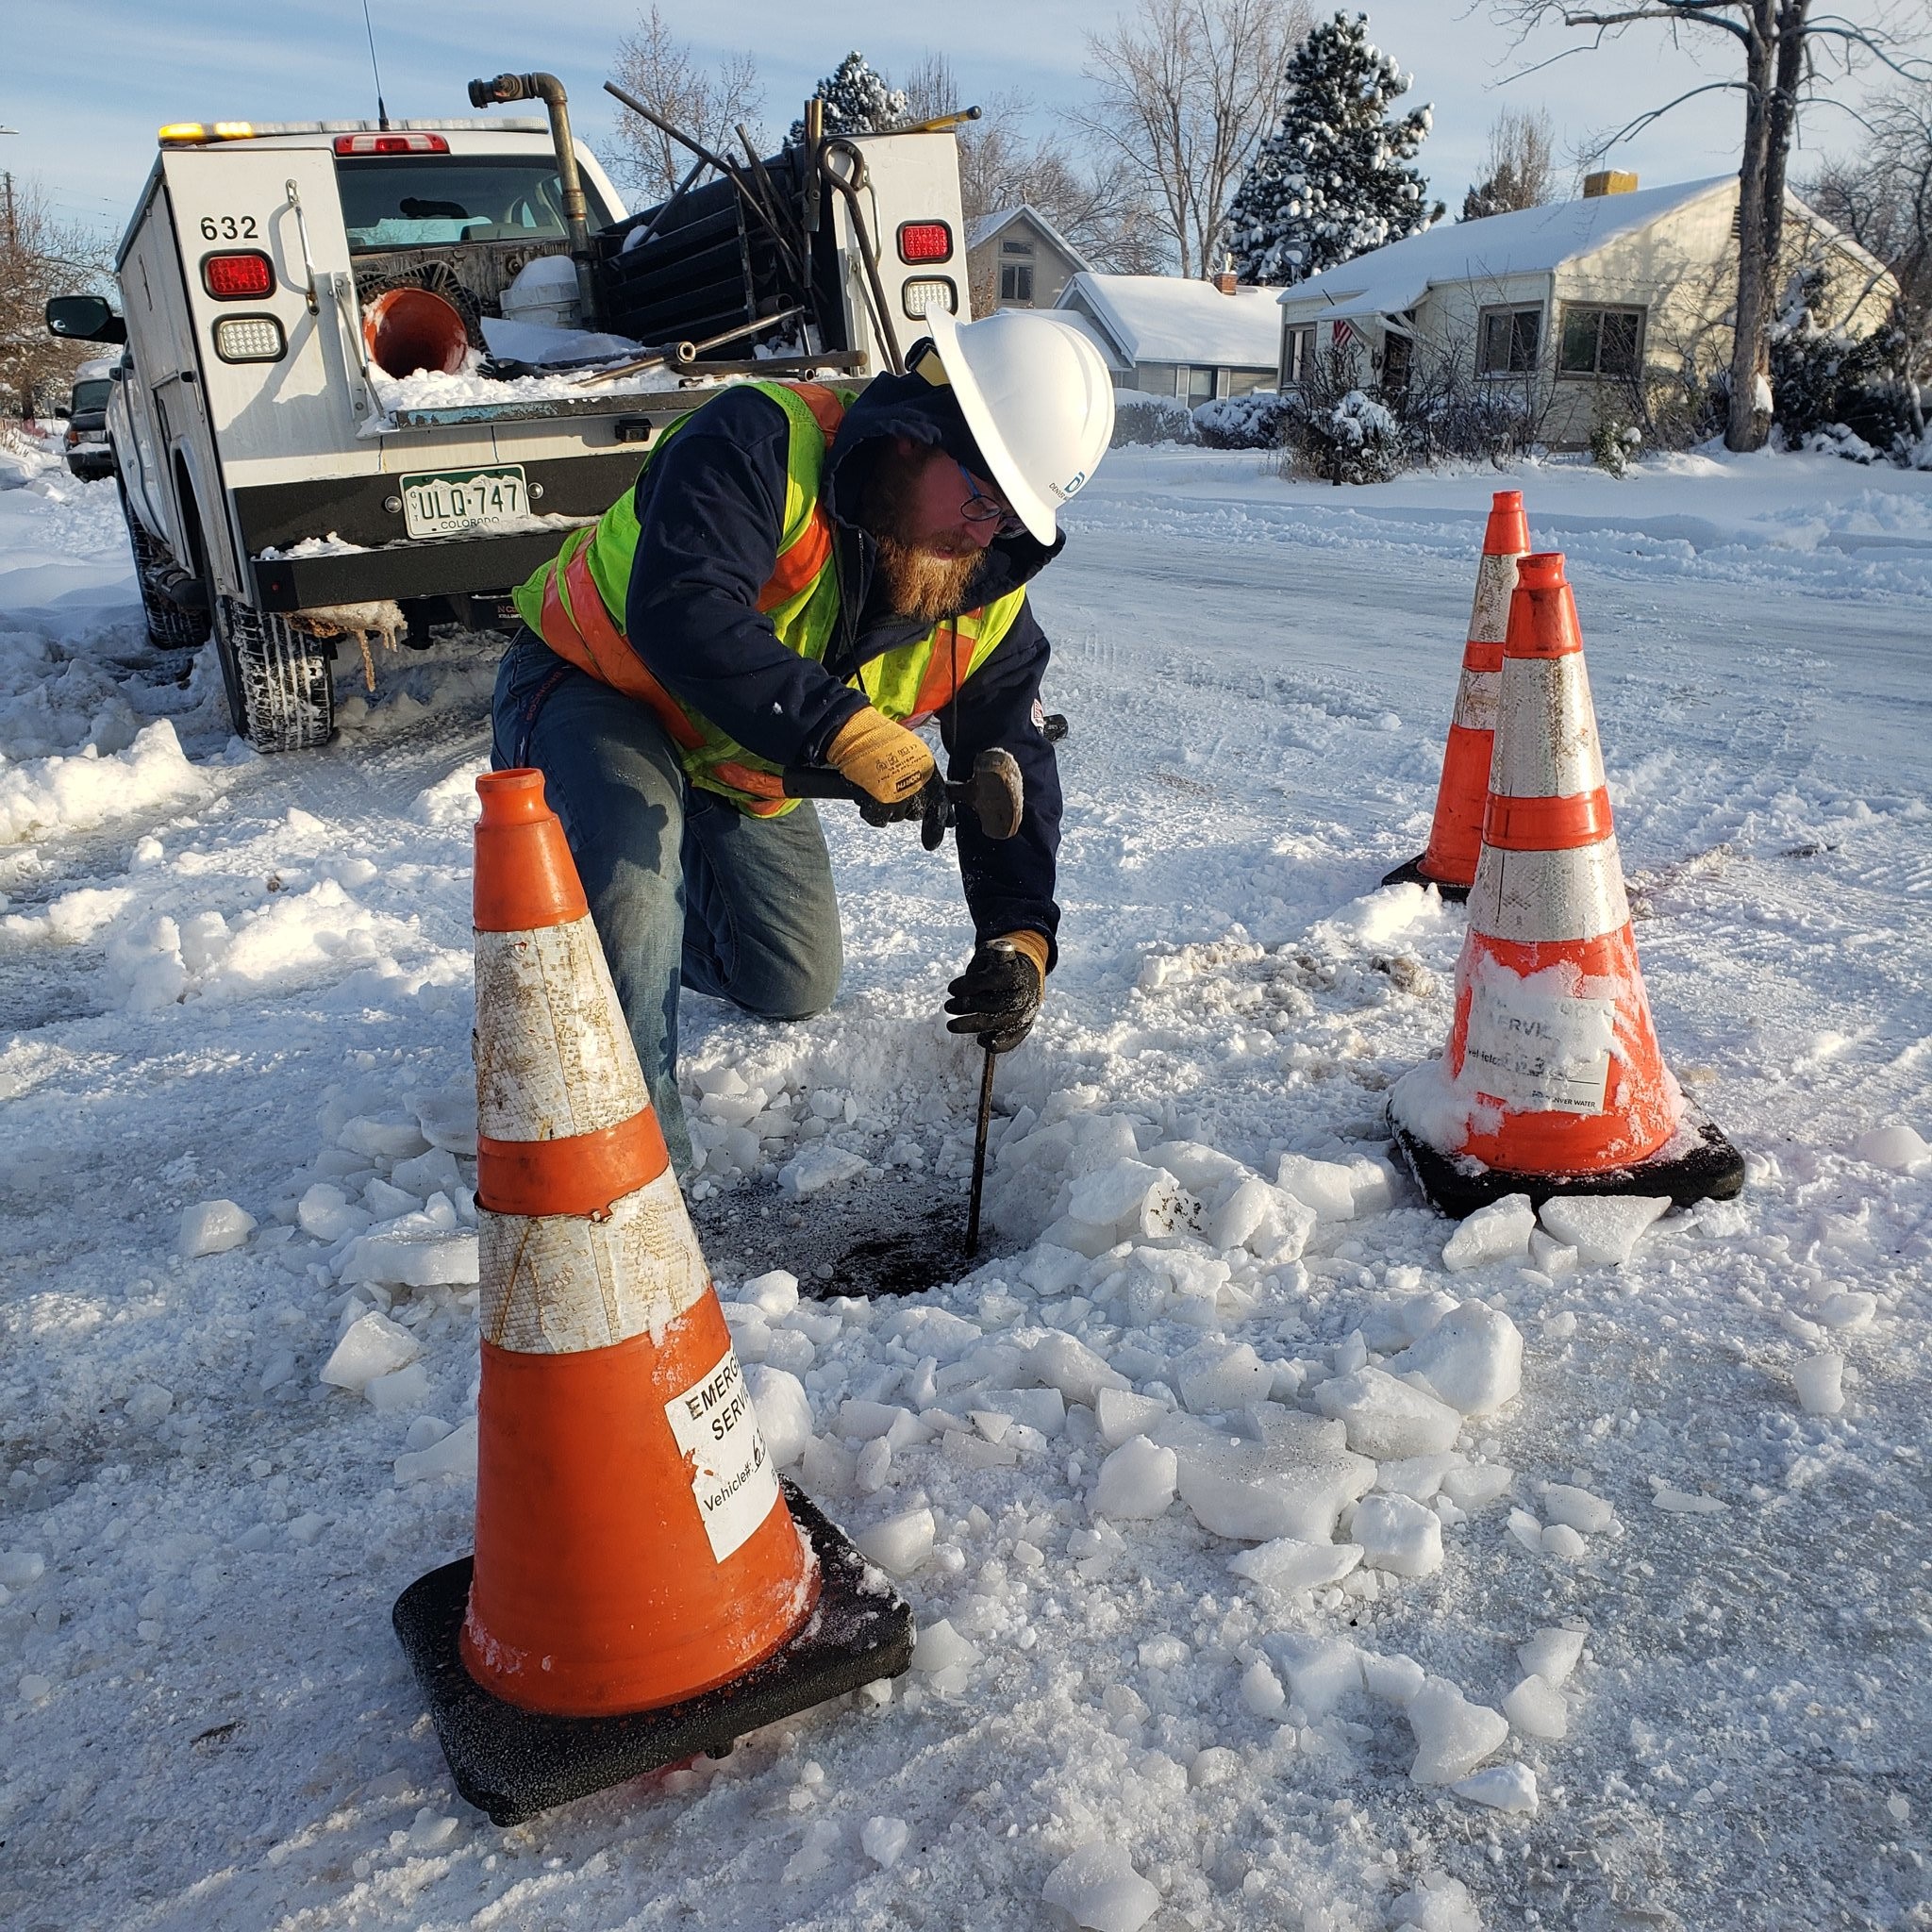 Denver Water employee is chiseling through ice to expose a shut-off valve cover. Safety cones sit around him.